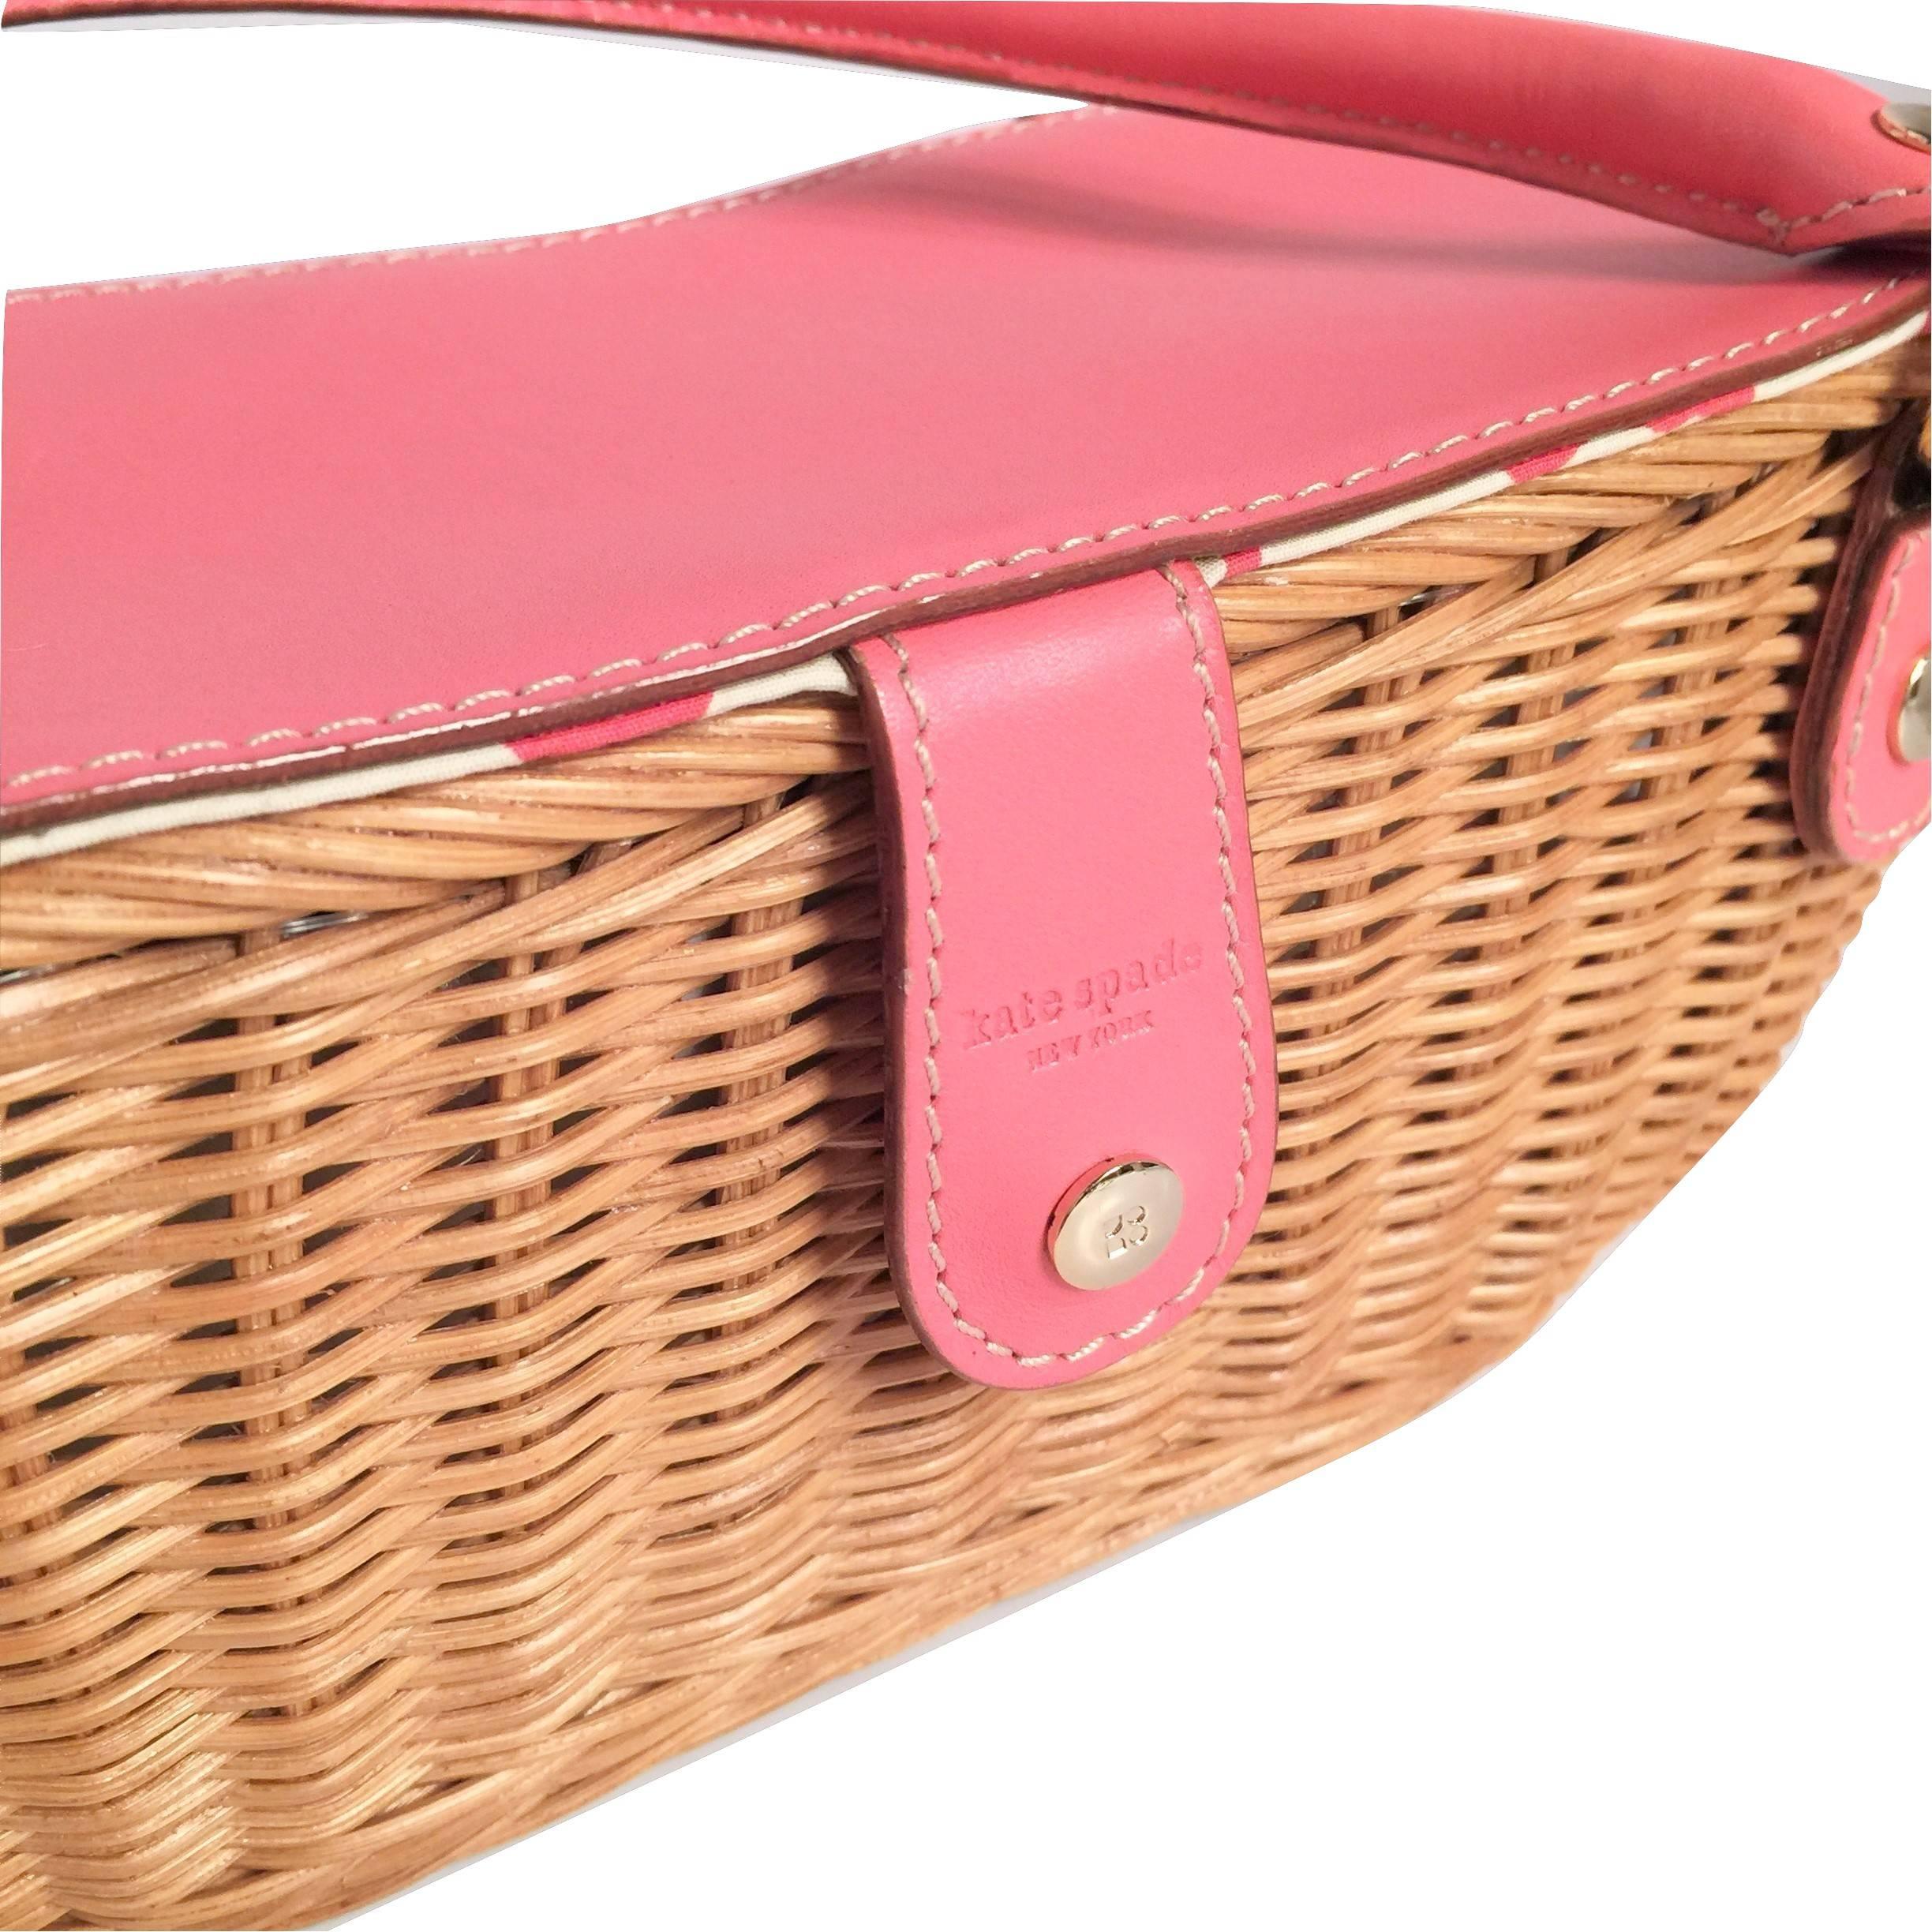 New Kate Spade Her Rare Large Collectible Spring 2005 Pink Wicker Basket Bag 7